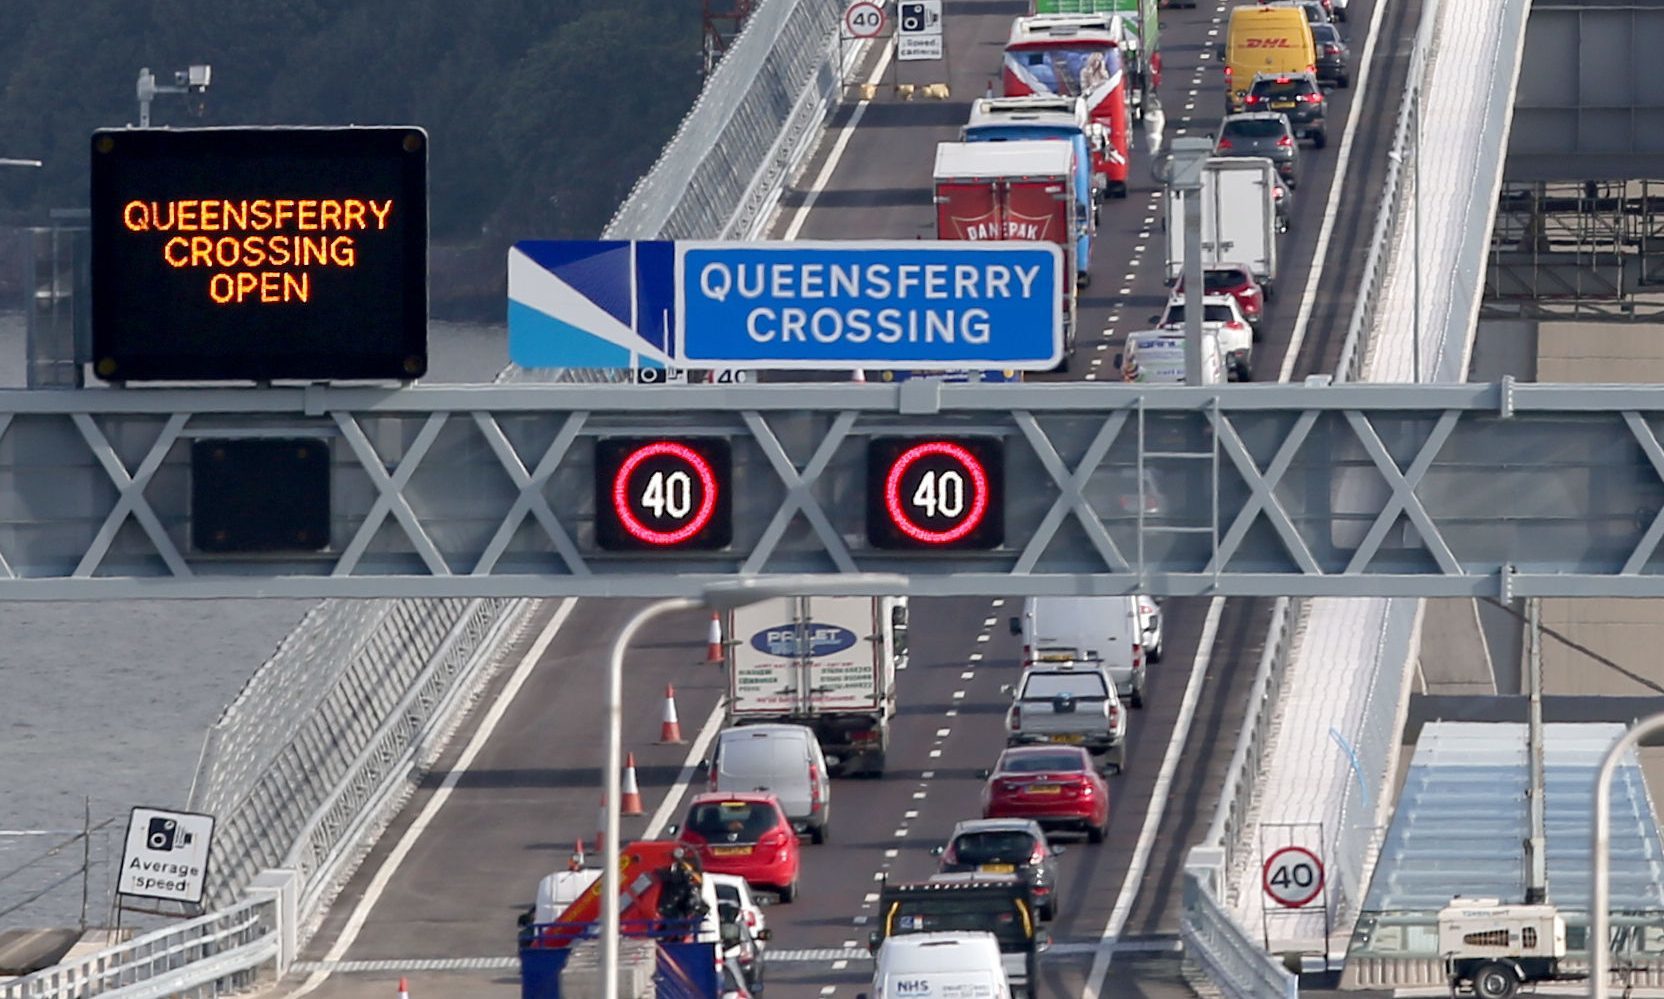 The 40mph limit will eventually rise to 70mph, with the Queensferry Crossing classed as motorway.